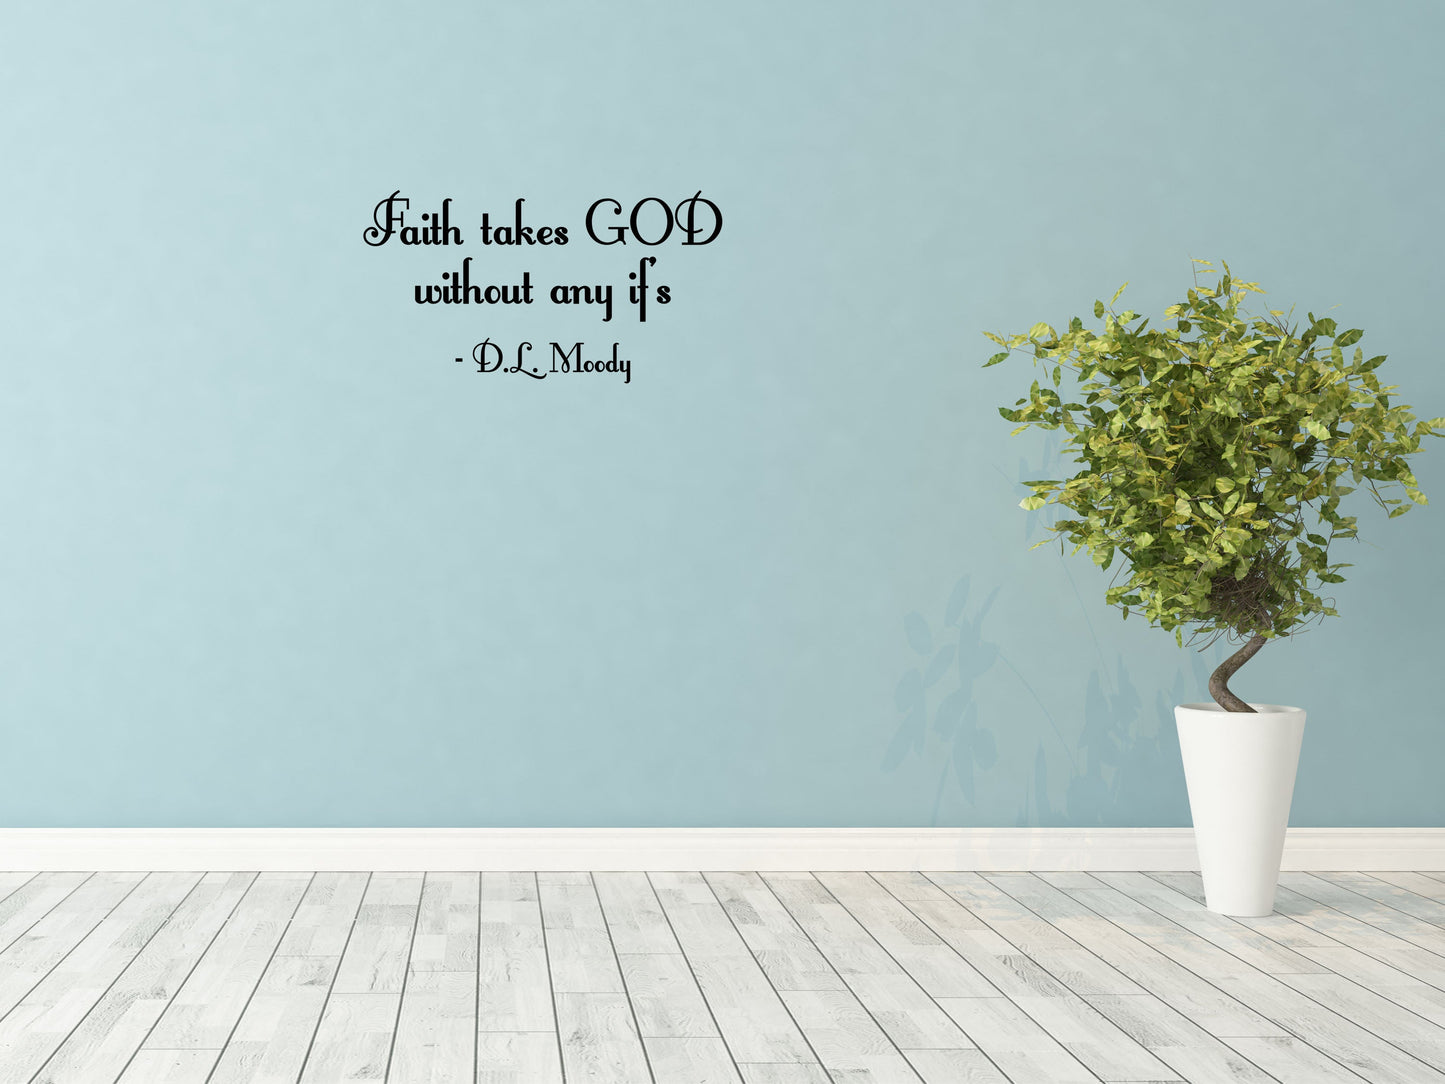 Faith Takes God Vinyl Wall Decal D.L. Moody - Bedroom Wall Decal - Religious Wall Decal - Christian Wall Sign - Master Bedroom Decal Vinyl Wall Decal Inspirational Wall Signs 